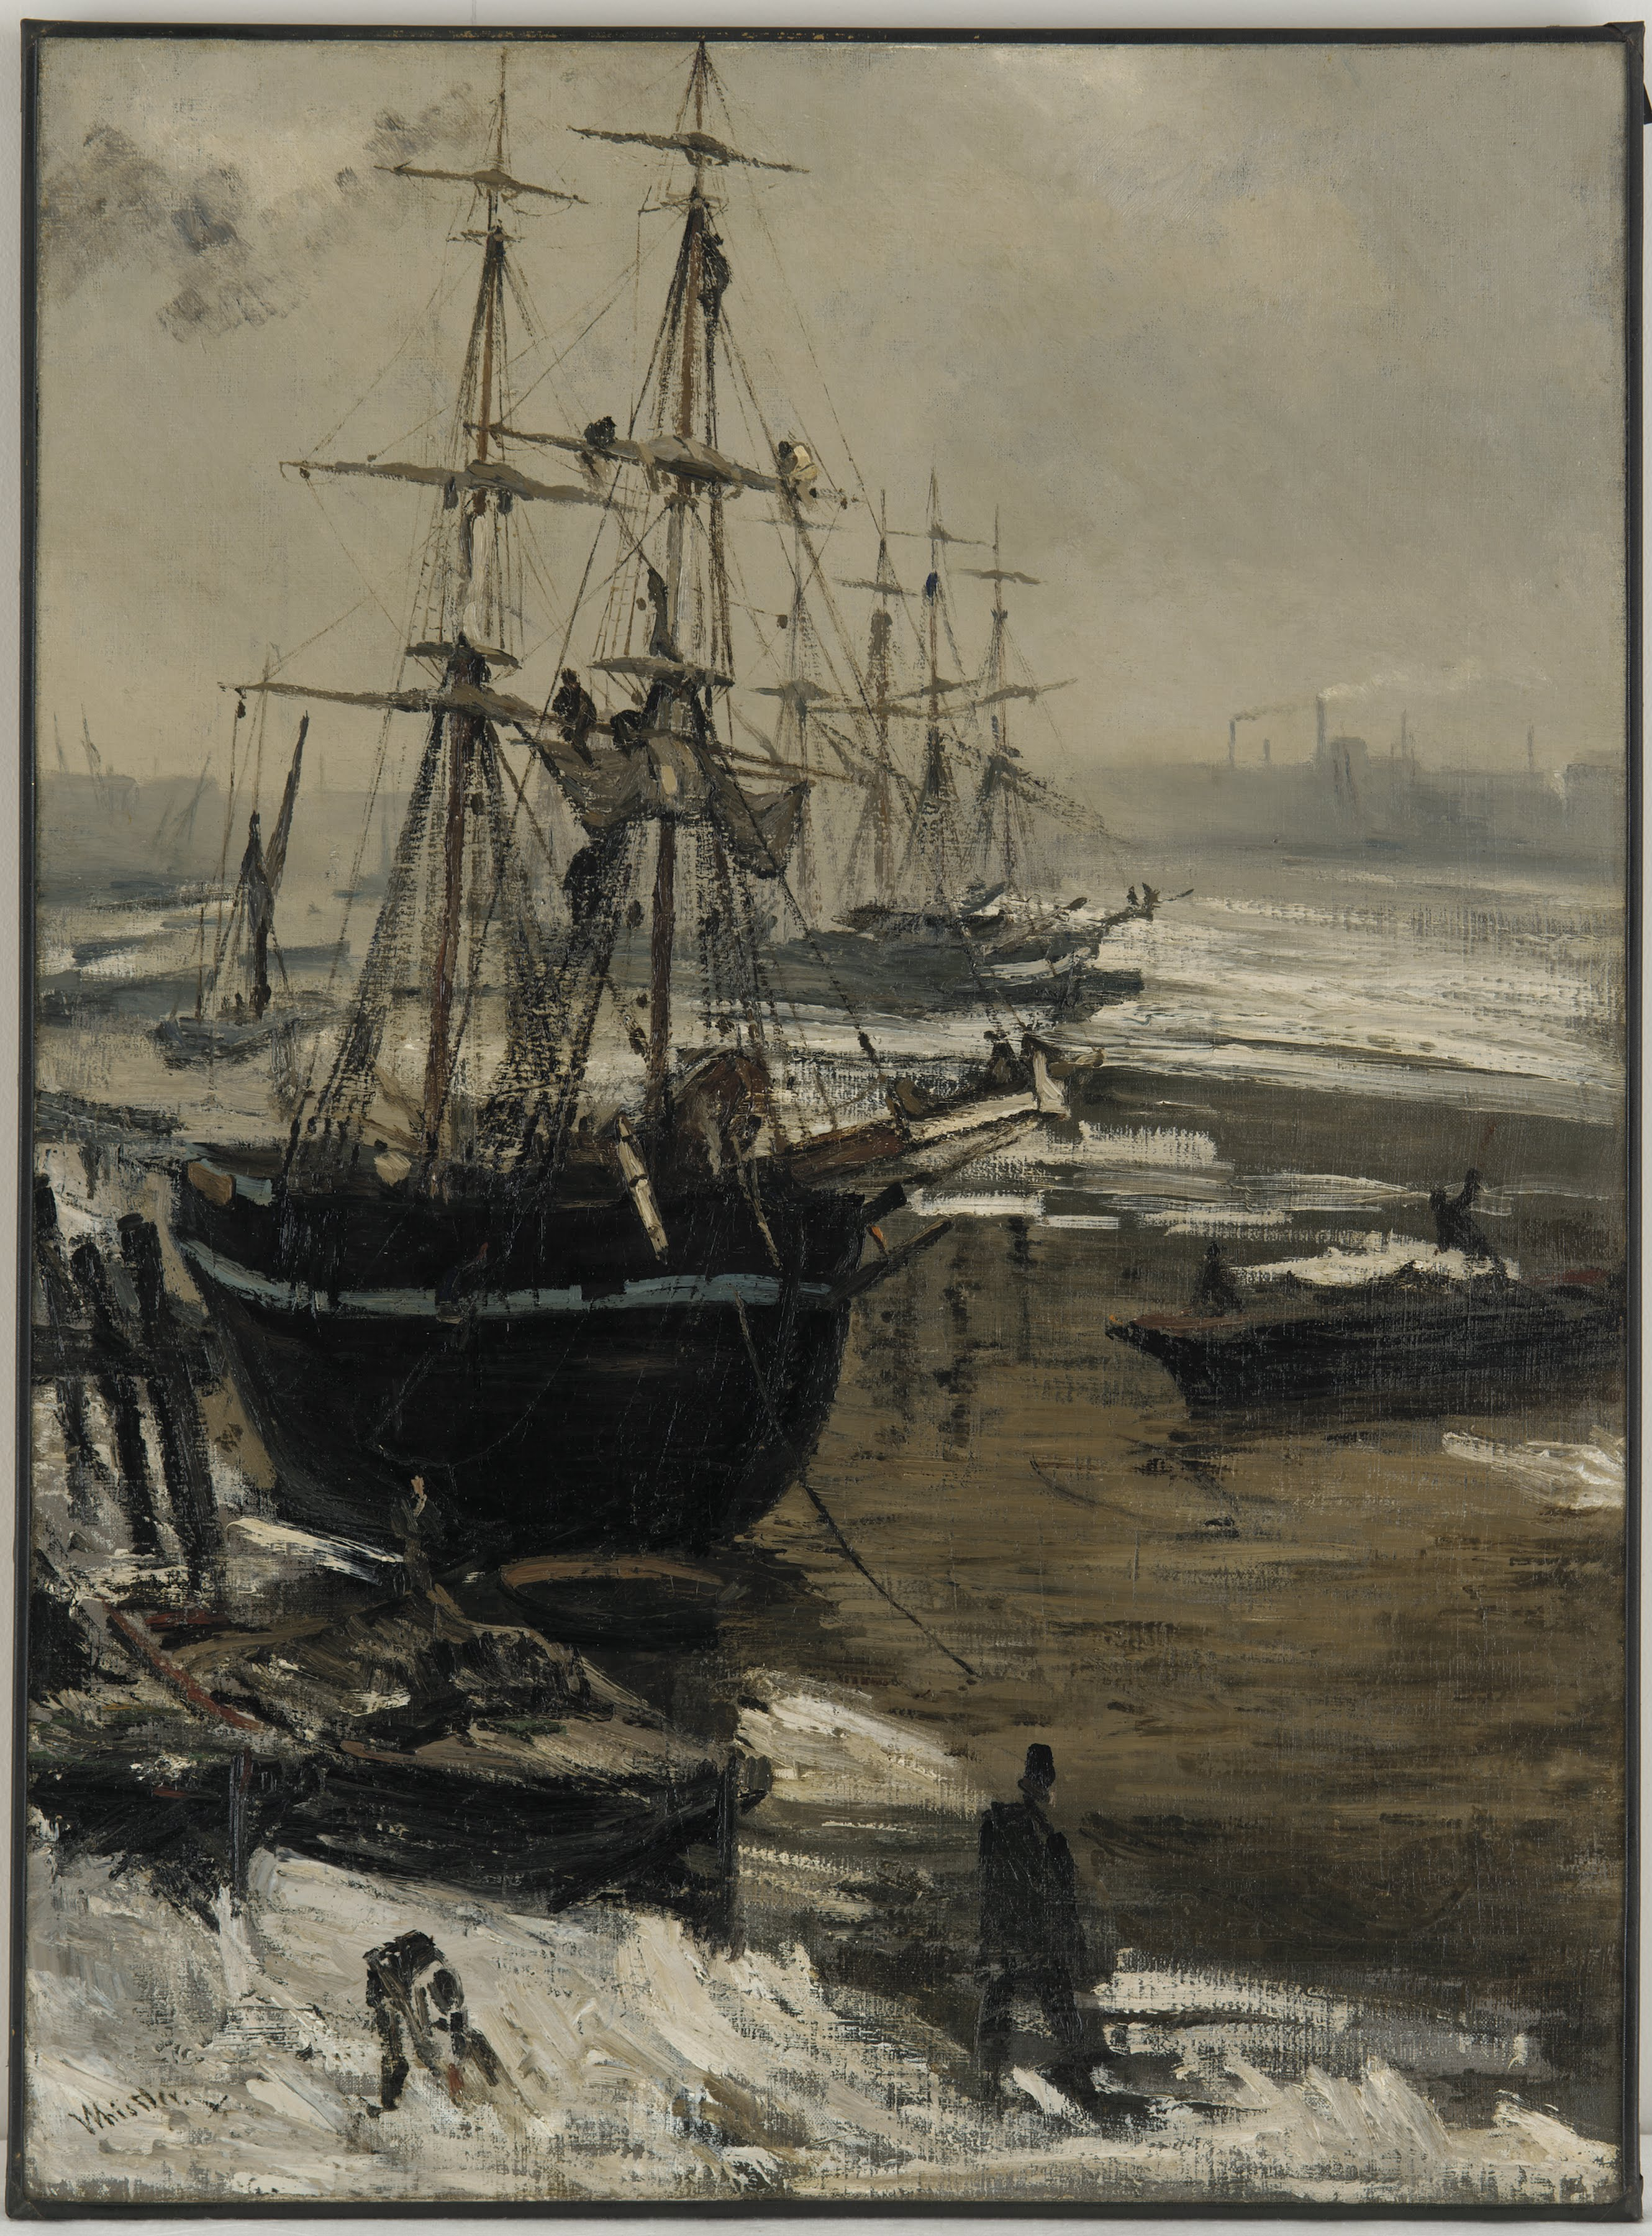 James McNeill Whistler - The Thames in Ice - Google Art Project